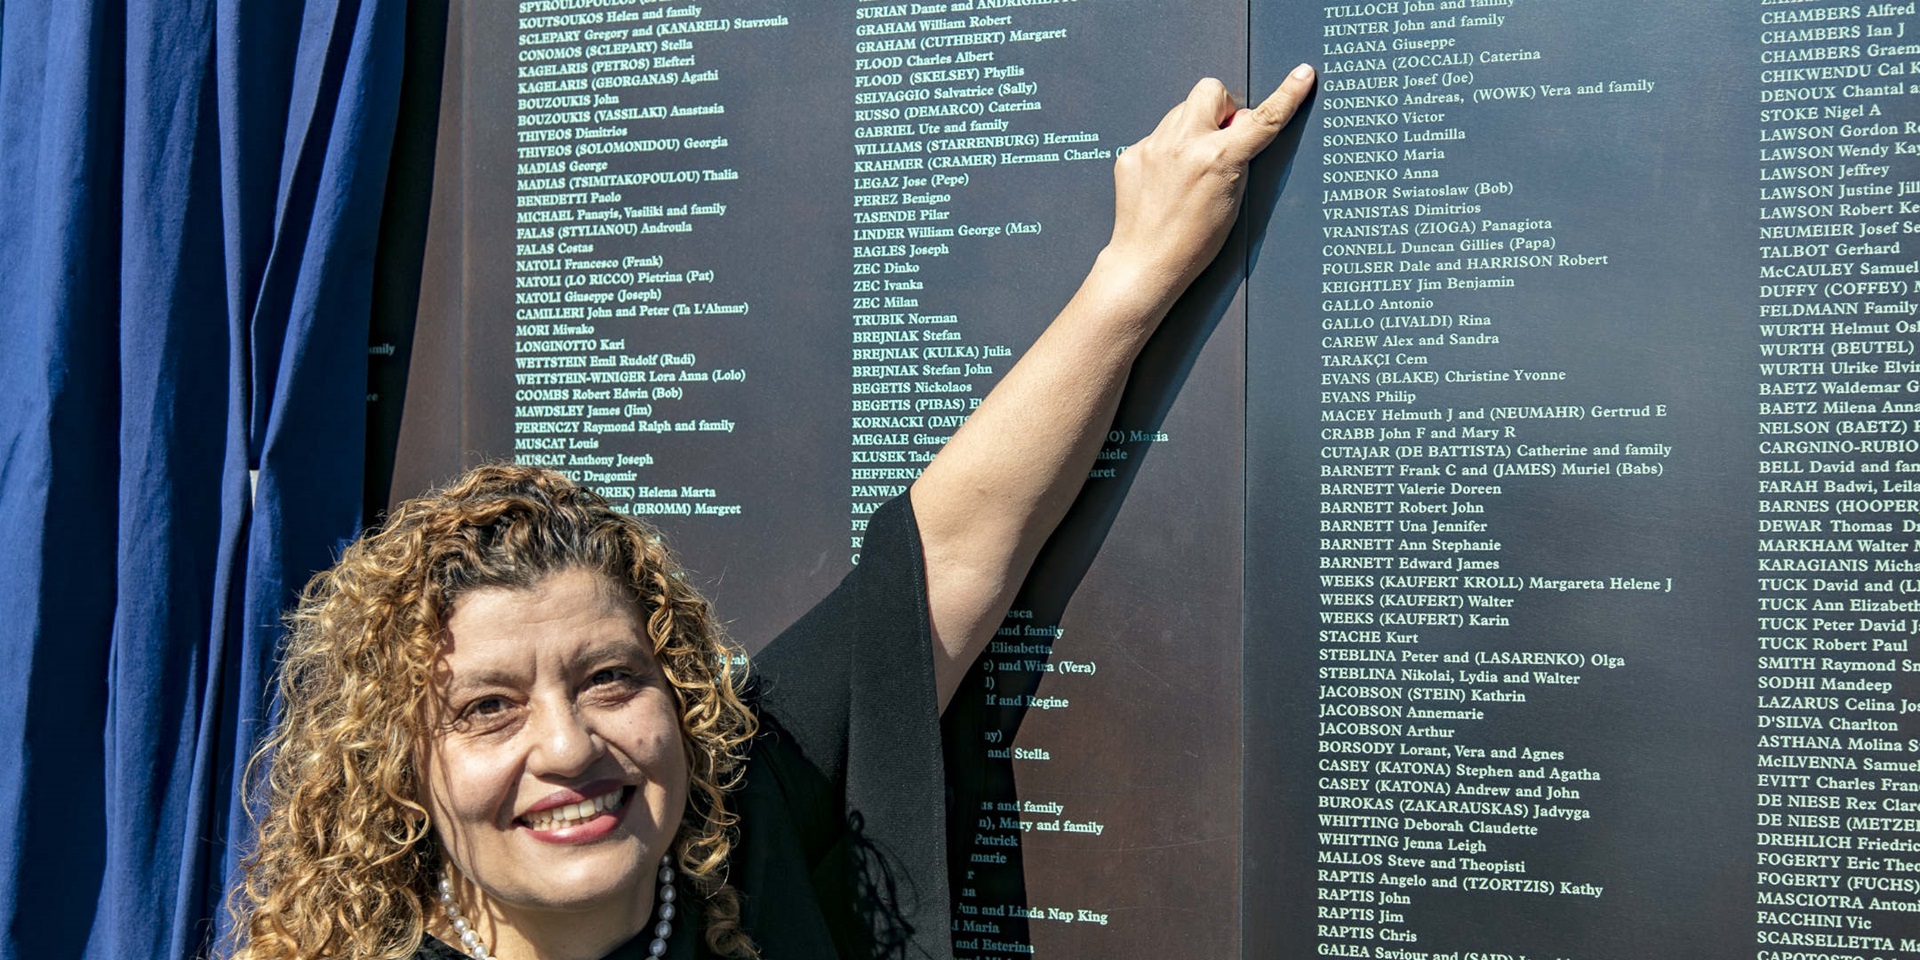 Welcome Wall unveiling ceremony, 7 May 2018. Mary Lagana, daughter of Giuseppe and Caterina from Calabria, Italy.